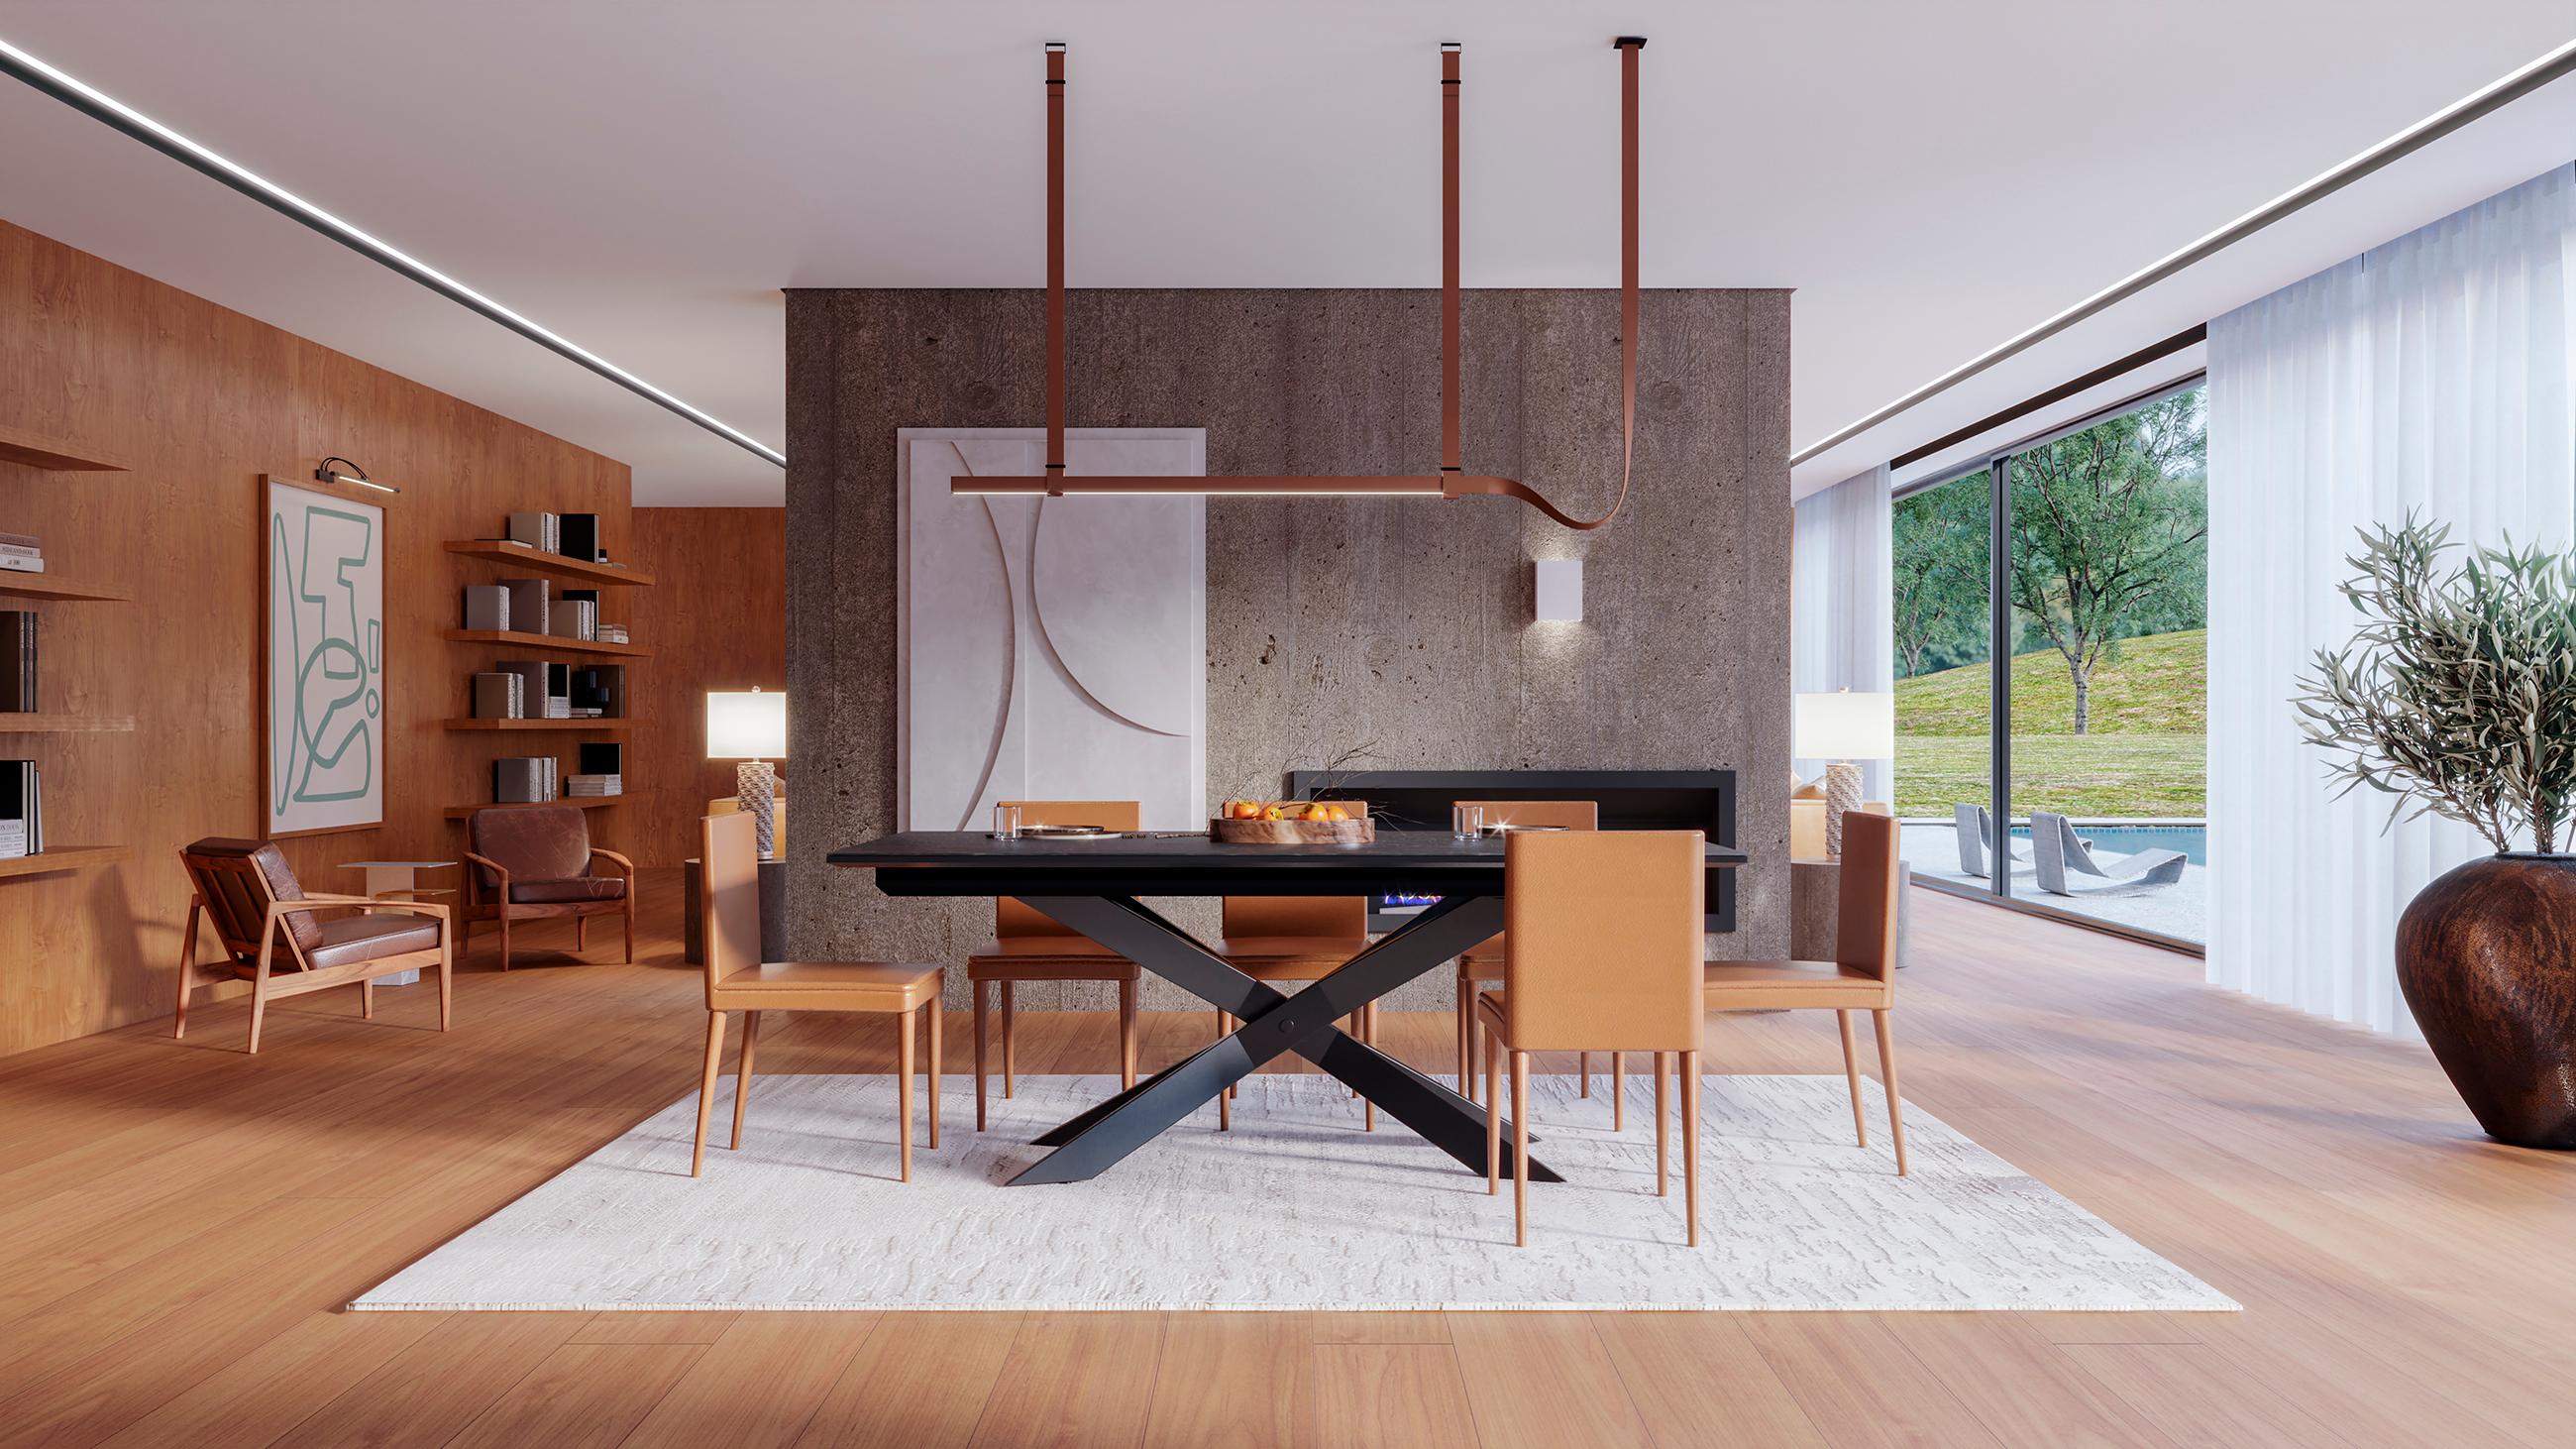 The iconic Carat extendable dining table is a best-seller from animovel which is 100% produced in Portugal, Europe and is highly customizable, being available in different sizes and finishes.

This versatile piece makes it easy to accommodate and